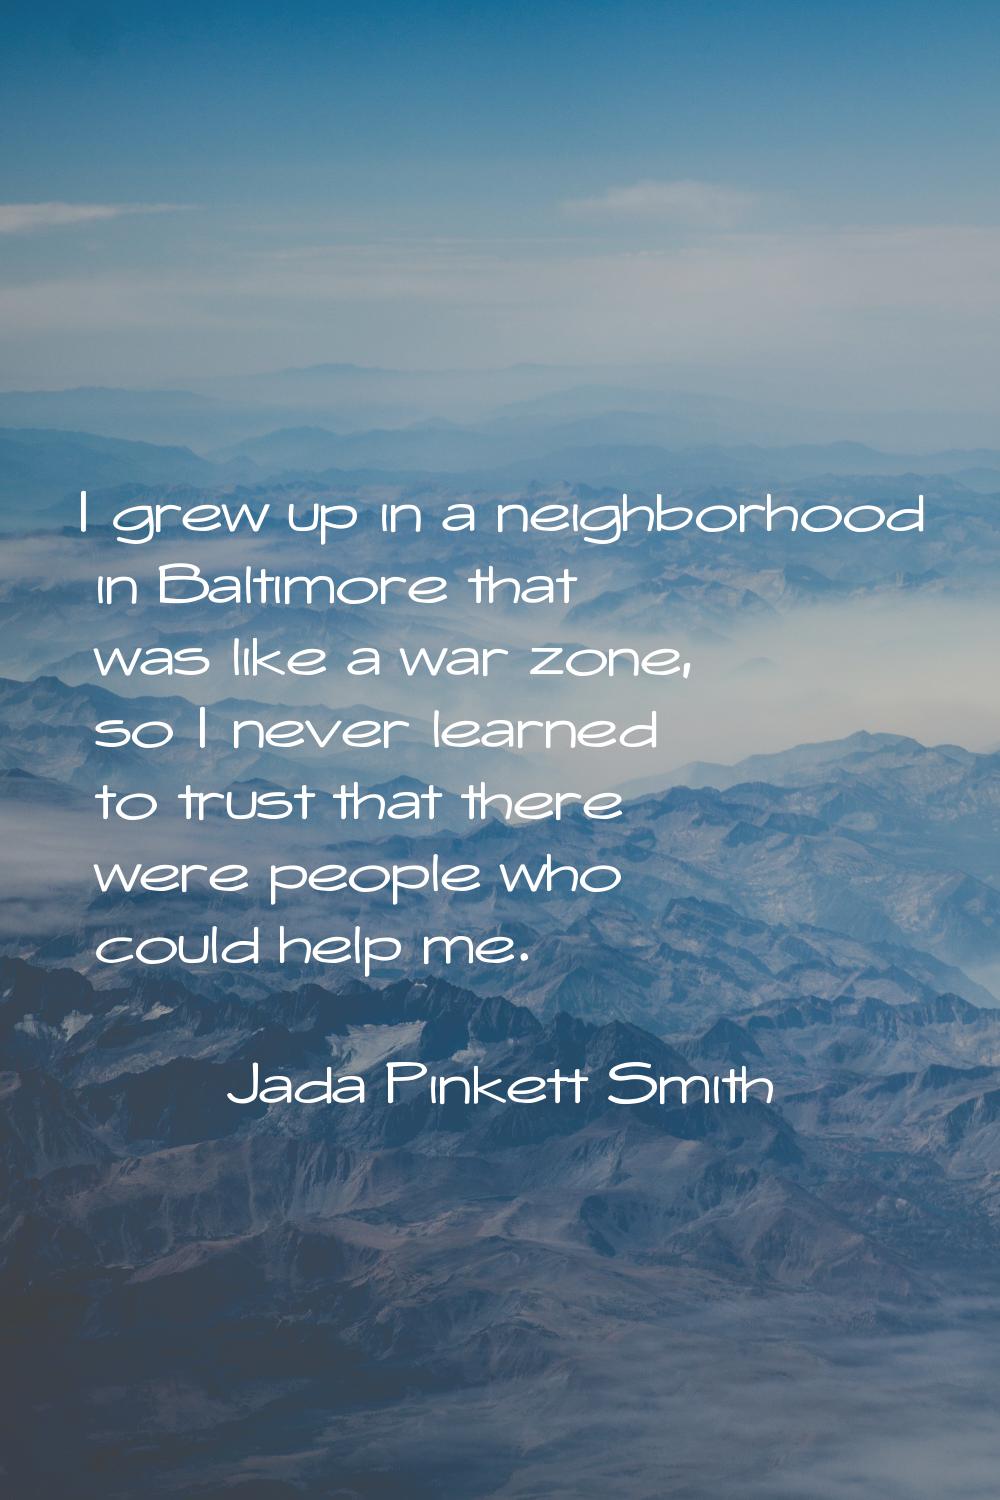 I grew up in a neighborhood in Baltimore that was like a war zone, so I never learned to trust that